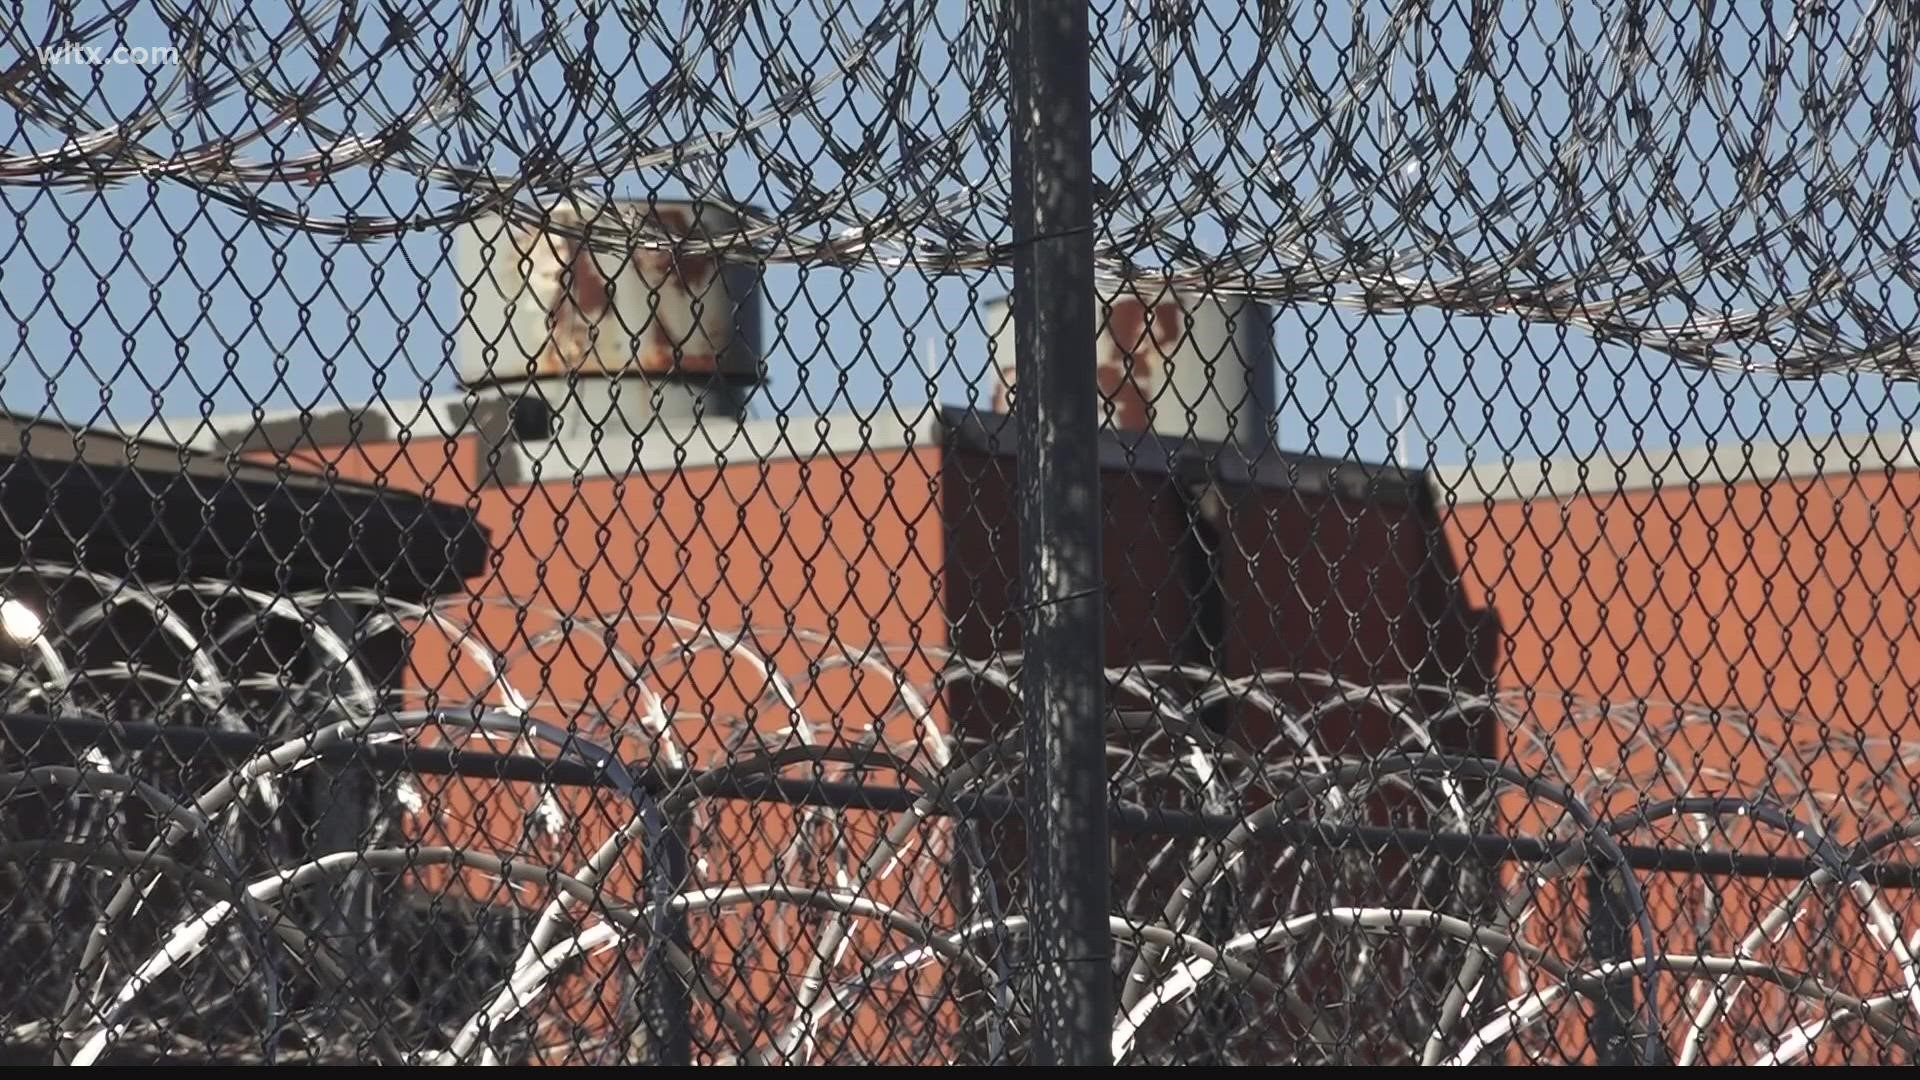 Richland County's administrator answered questions about ongoing issues at the jail. Here's what he said and how one inmate's family member reacted.